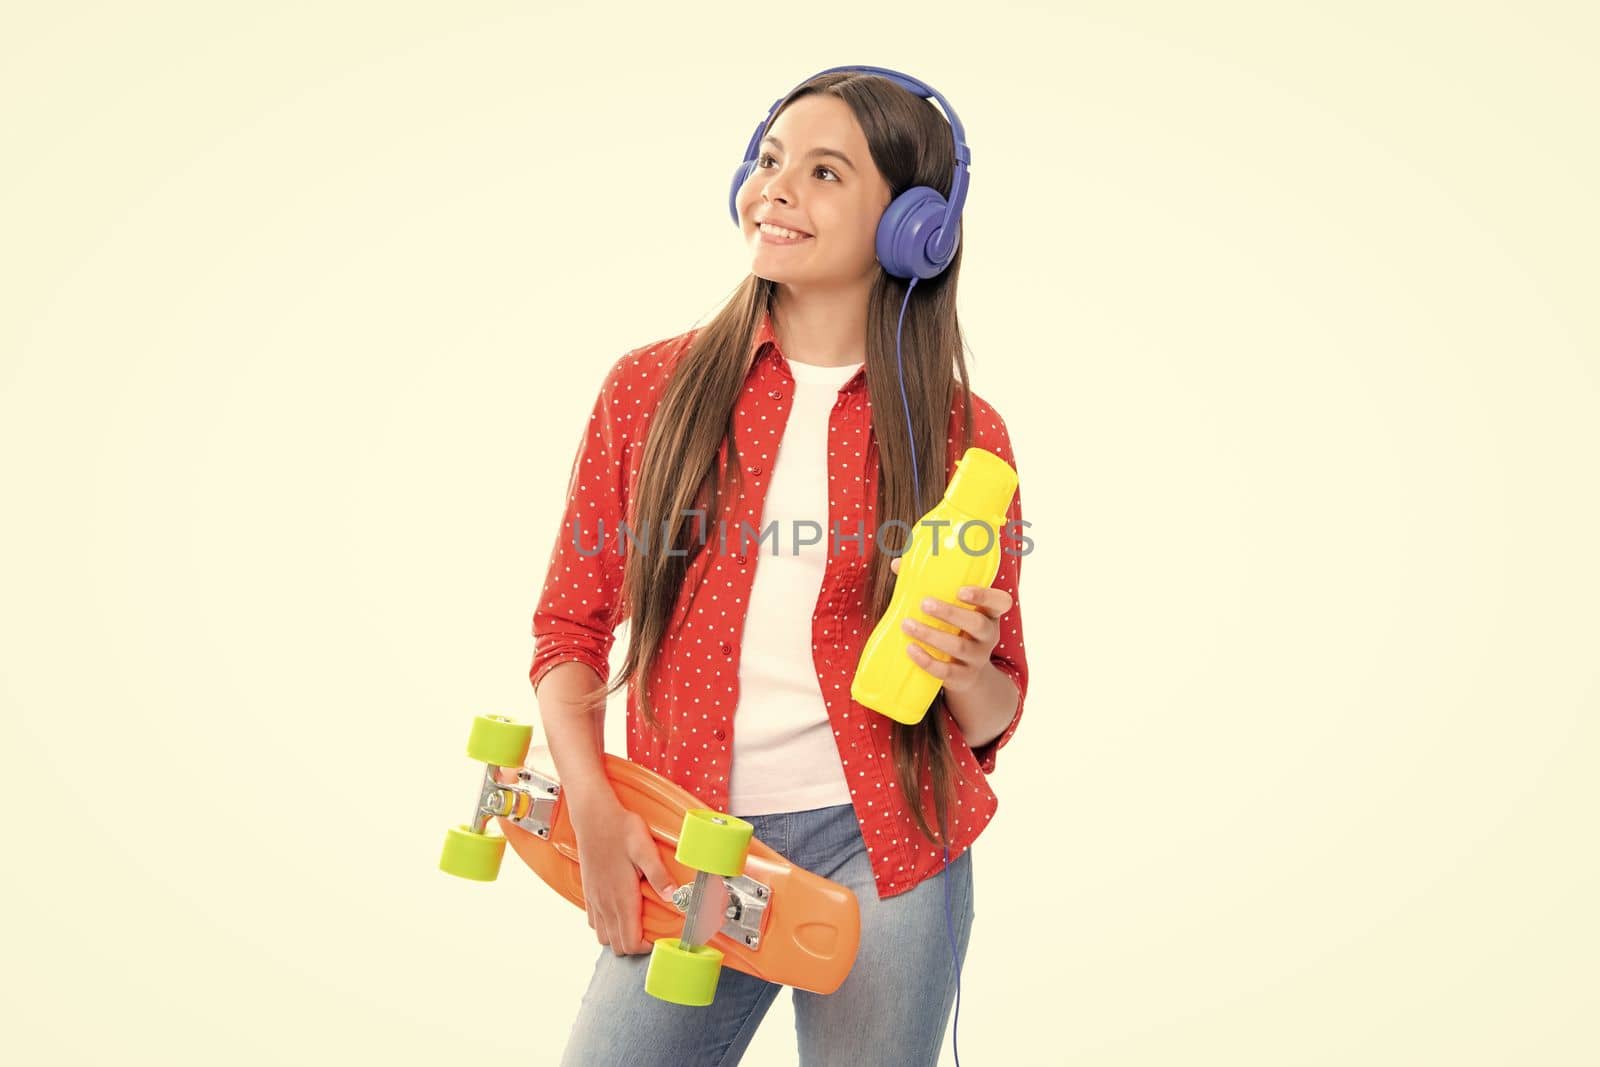 Teen girl 12, 13, 14 years old with skateboard and headphones over white studio background. Cool modern teenager in stylish clothes. Teenagers lifestyle, casual youth culture. by RedFoxStudio